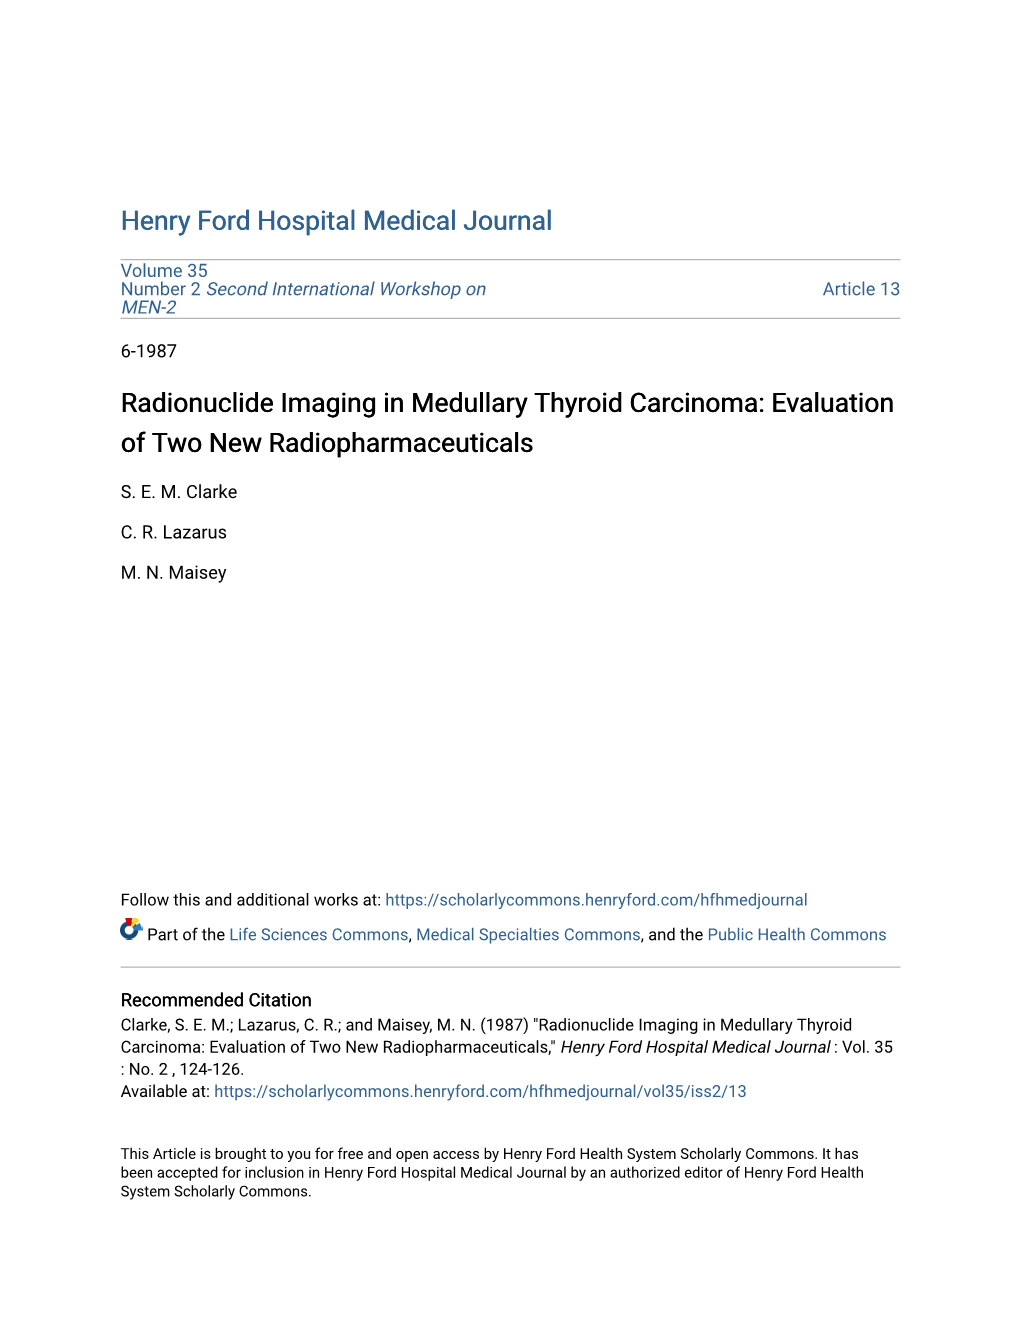 Radionuclide Imaging in Medullary Thyroid Carcinoma: Evaluation of Two New Radiopharmaceuticals